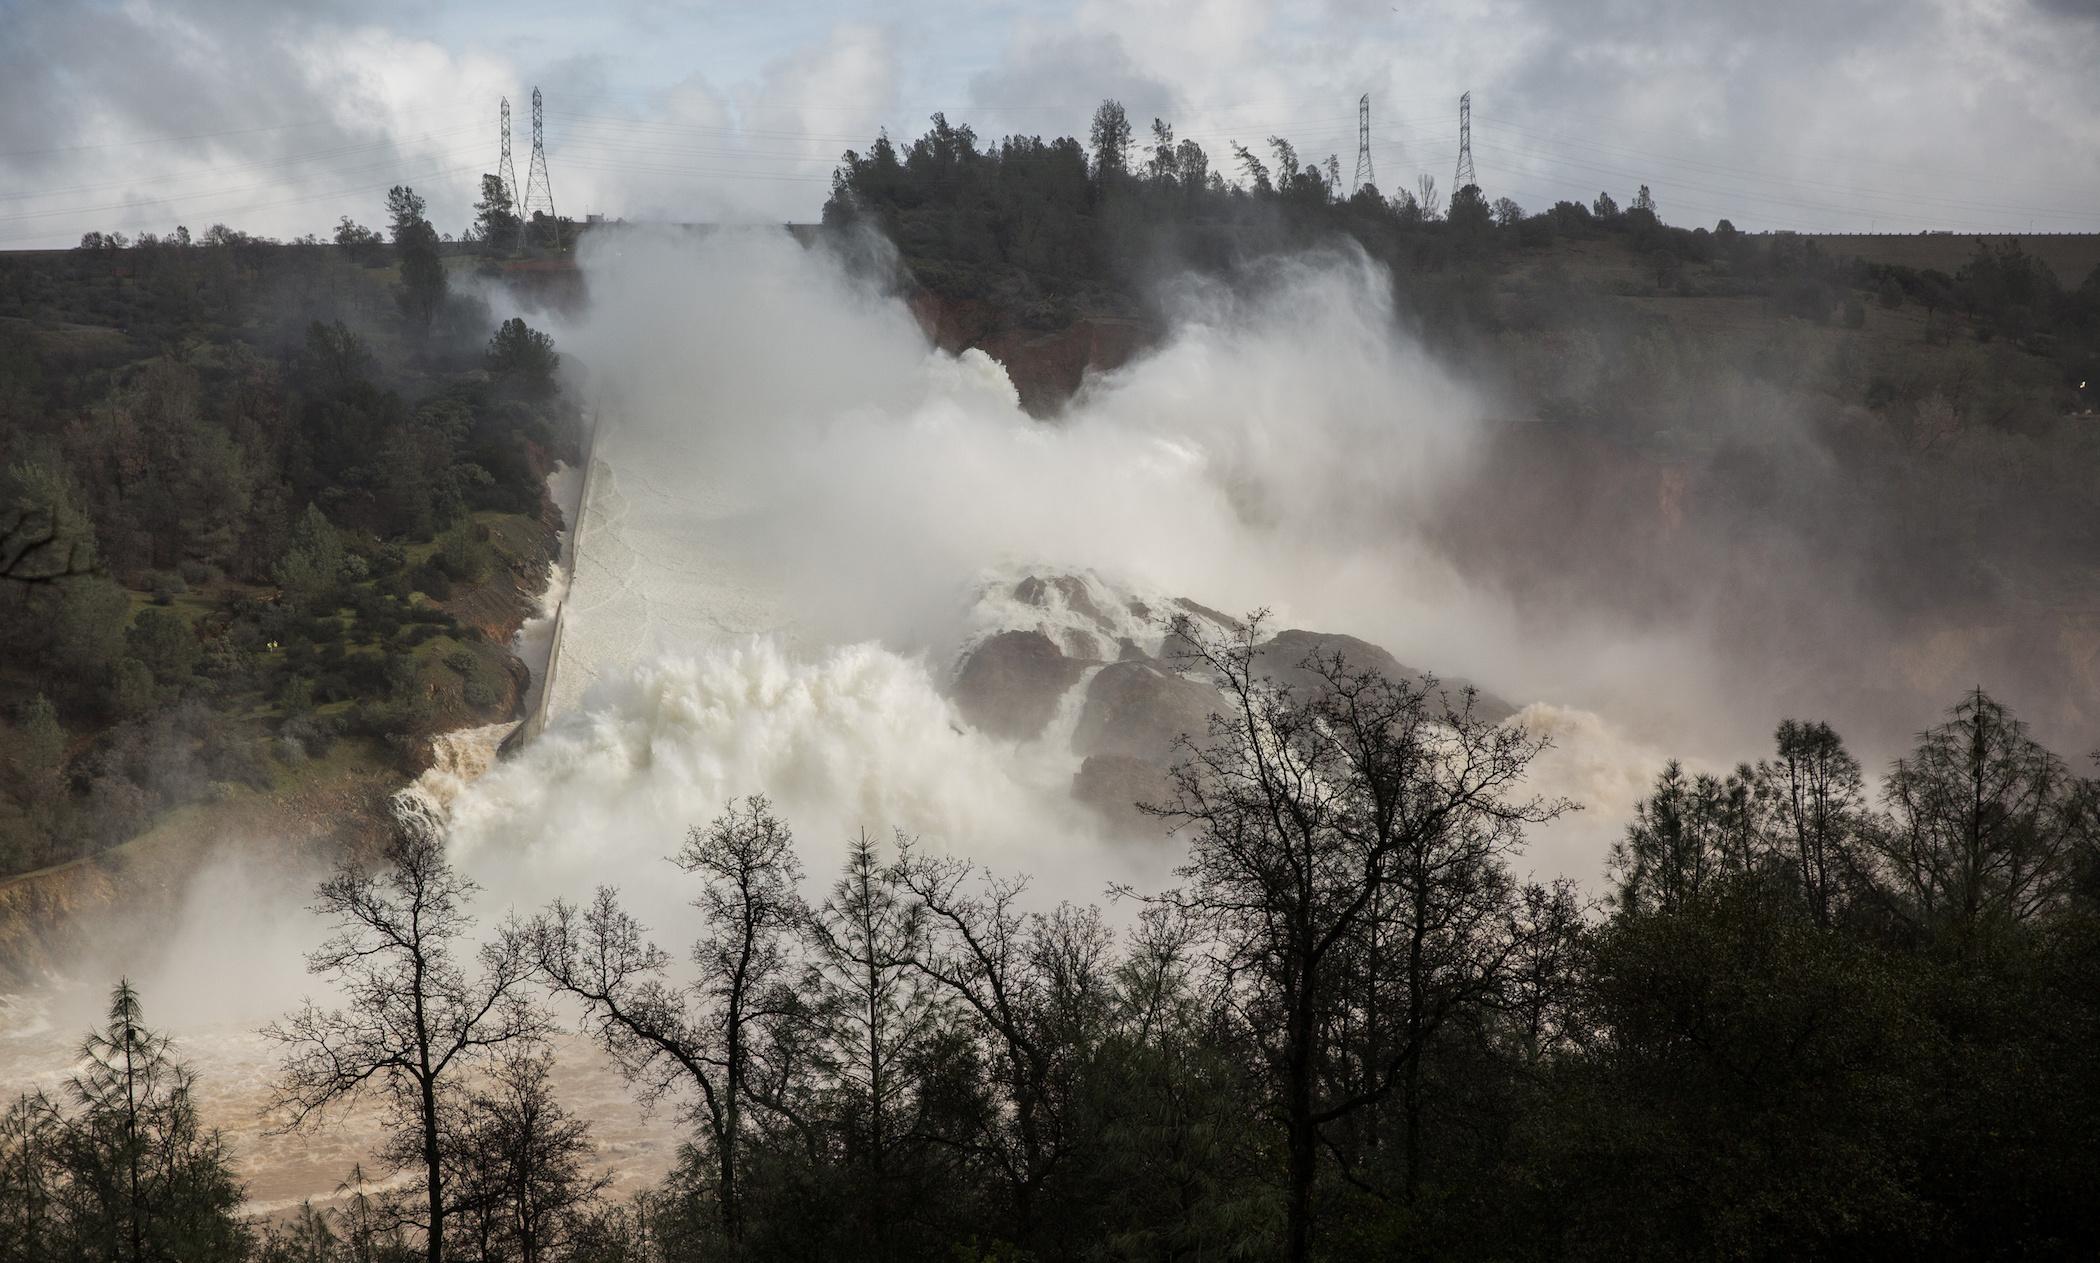 65,000 cfs of water flow through a damaged spillway on the Oroville Dam in Oroville, California, U.S., February 10, 2017.